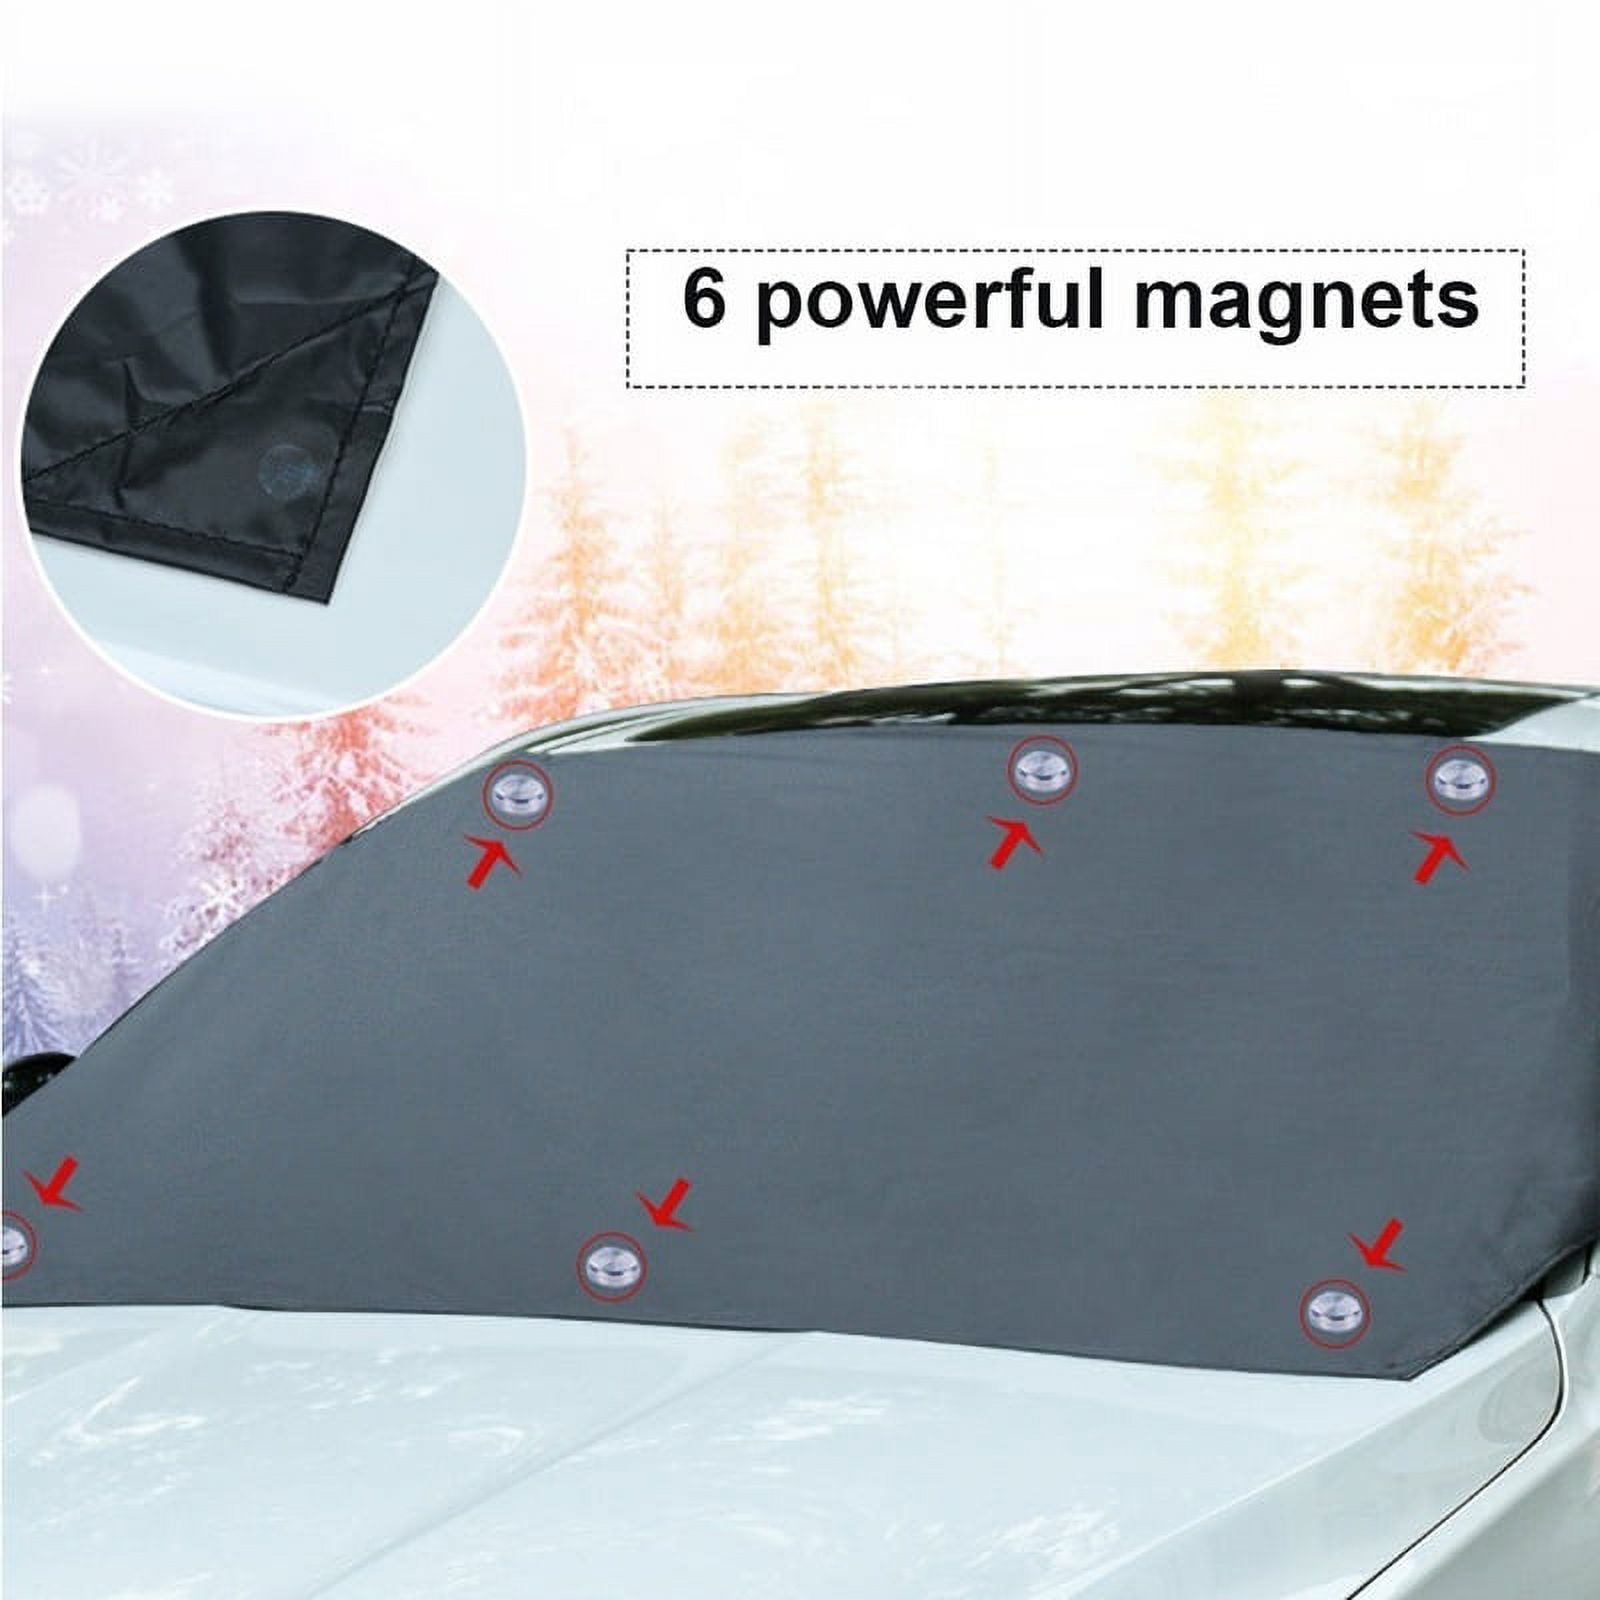 Magnetic Car Windscreen Cover Only £14.99